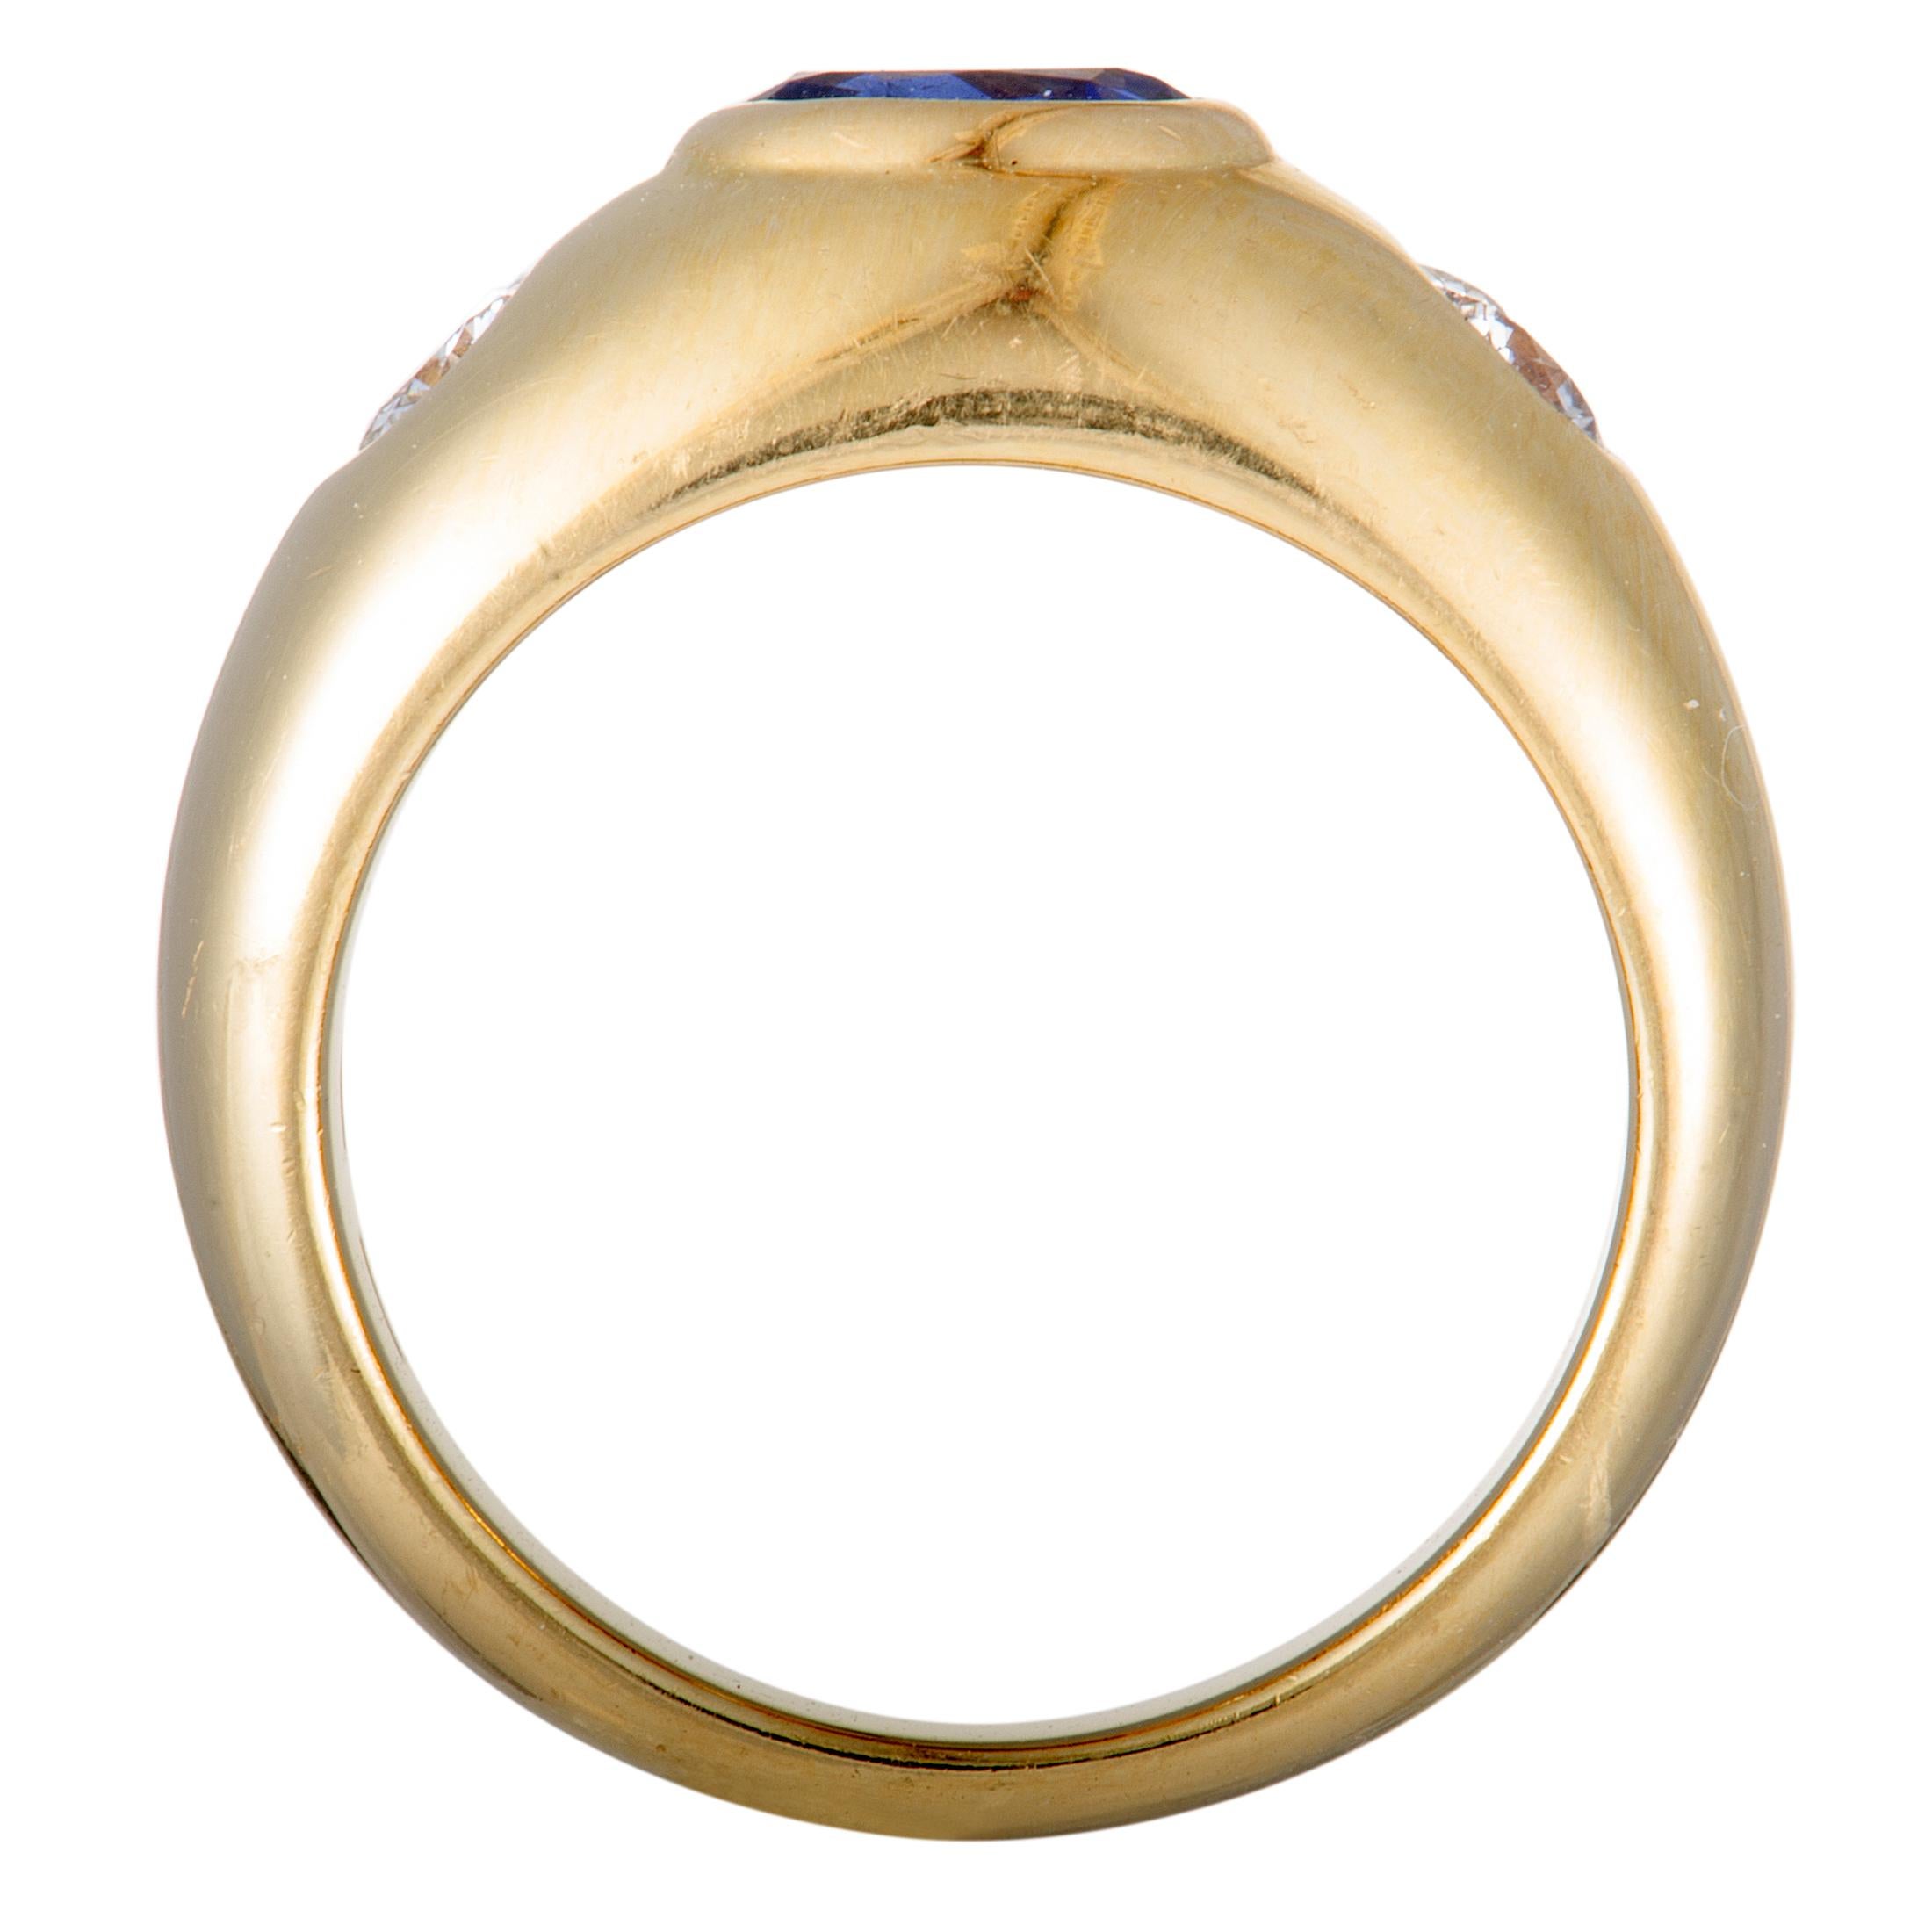 This elegant piece is designed by Bvlgari and it is beautifully crafted from luxurious 18K yellow gold, offering an exceptionally classy appearance. The ring is decorated with an expertly cut sapphire that weighs 1.00 carat, and with two gorgeous